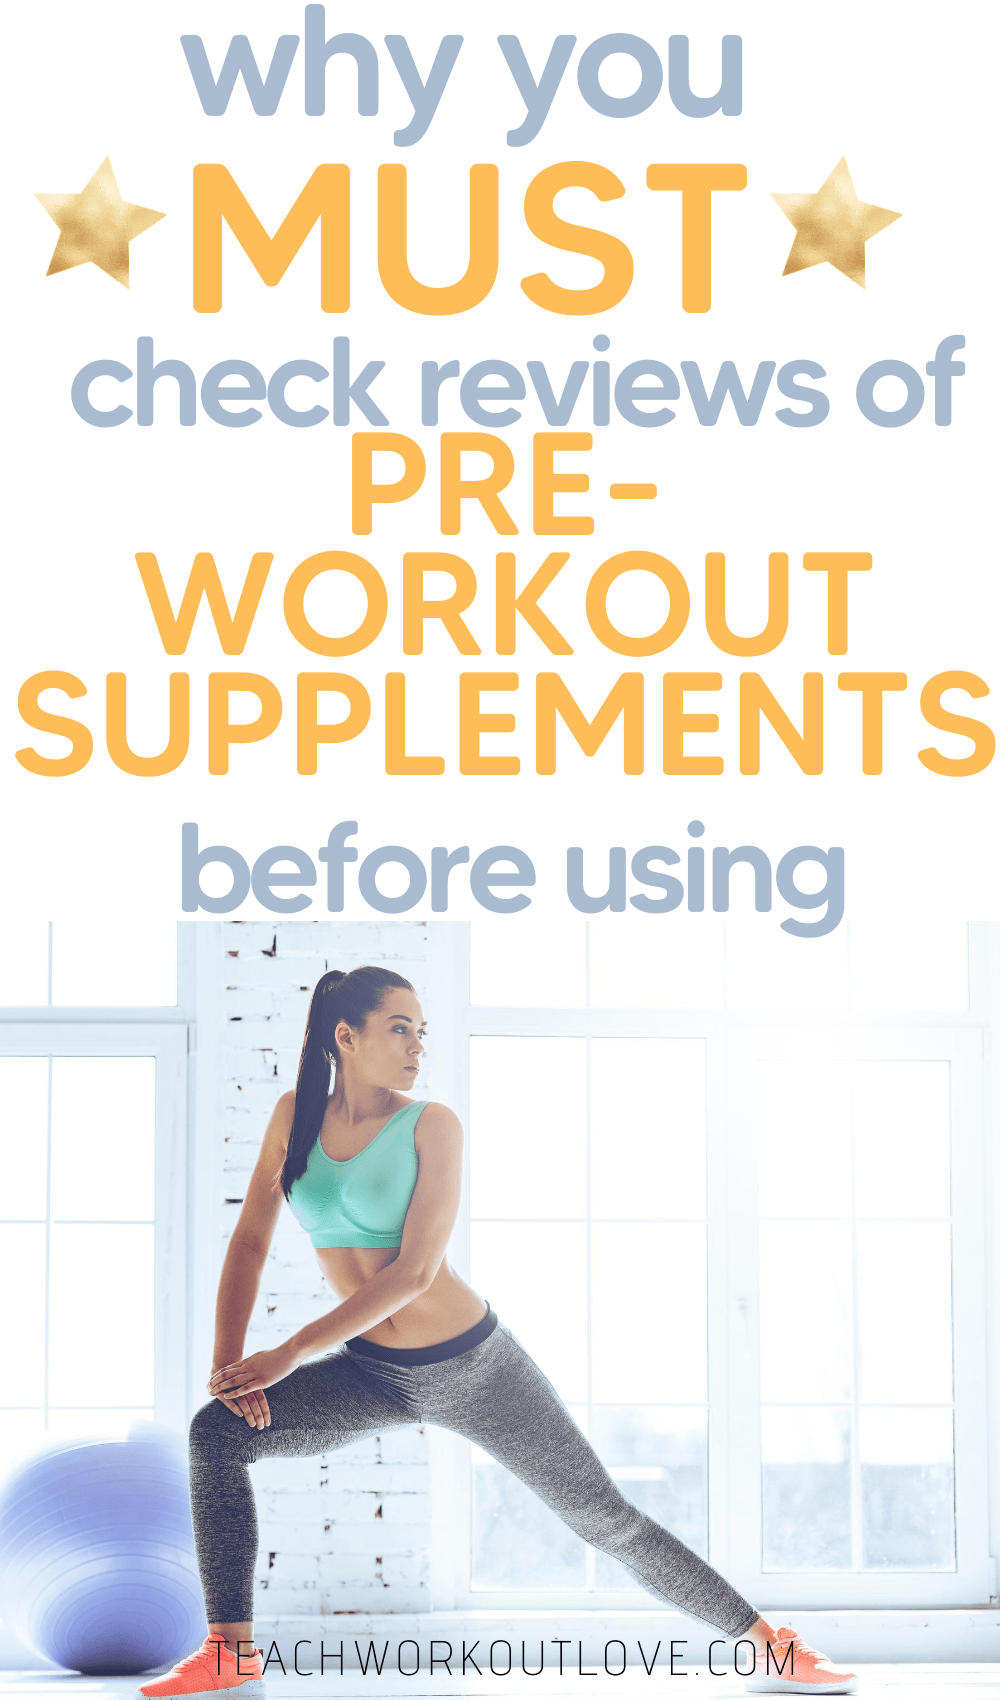 Working out can be challenging, so we like to take pre-workout supplements to help us. But we need to look at reviews first. Here's why: